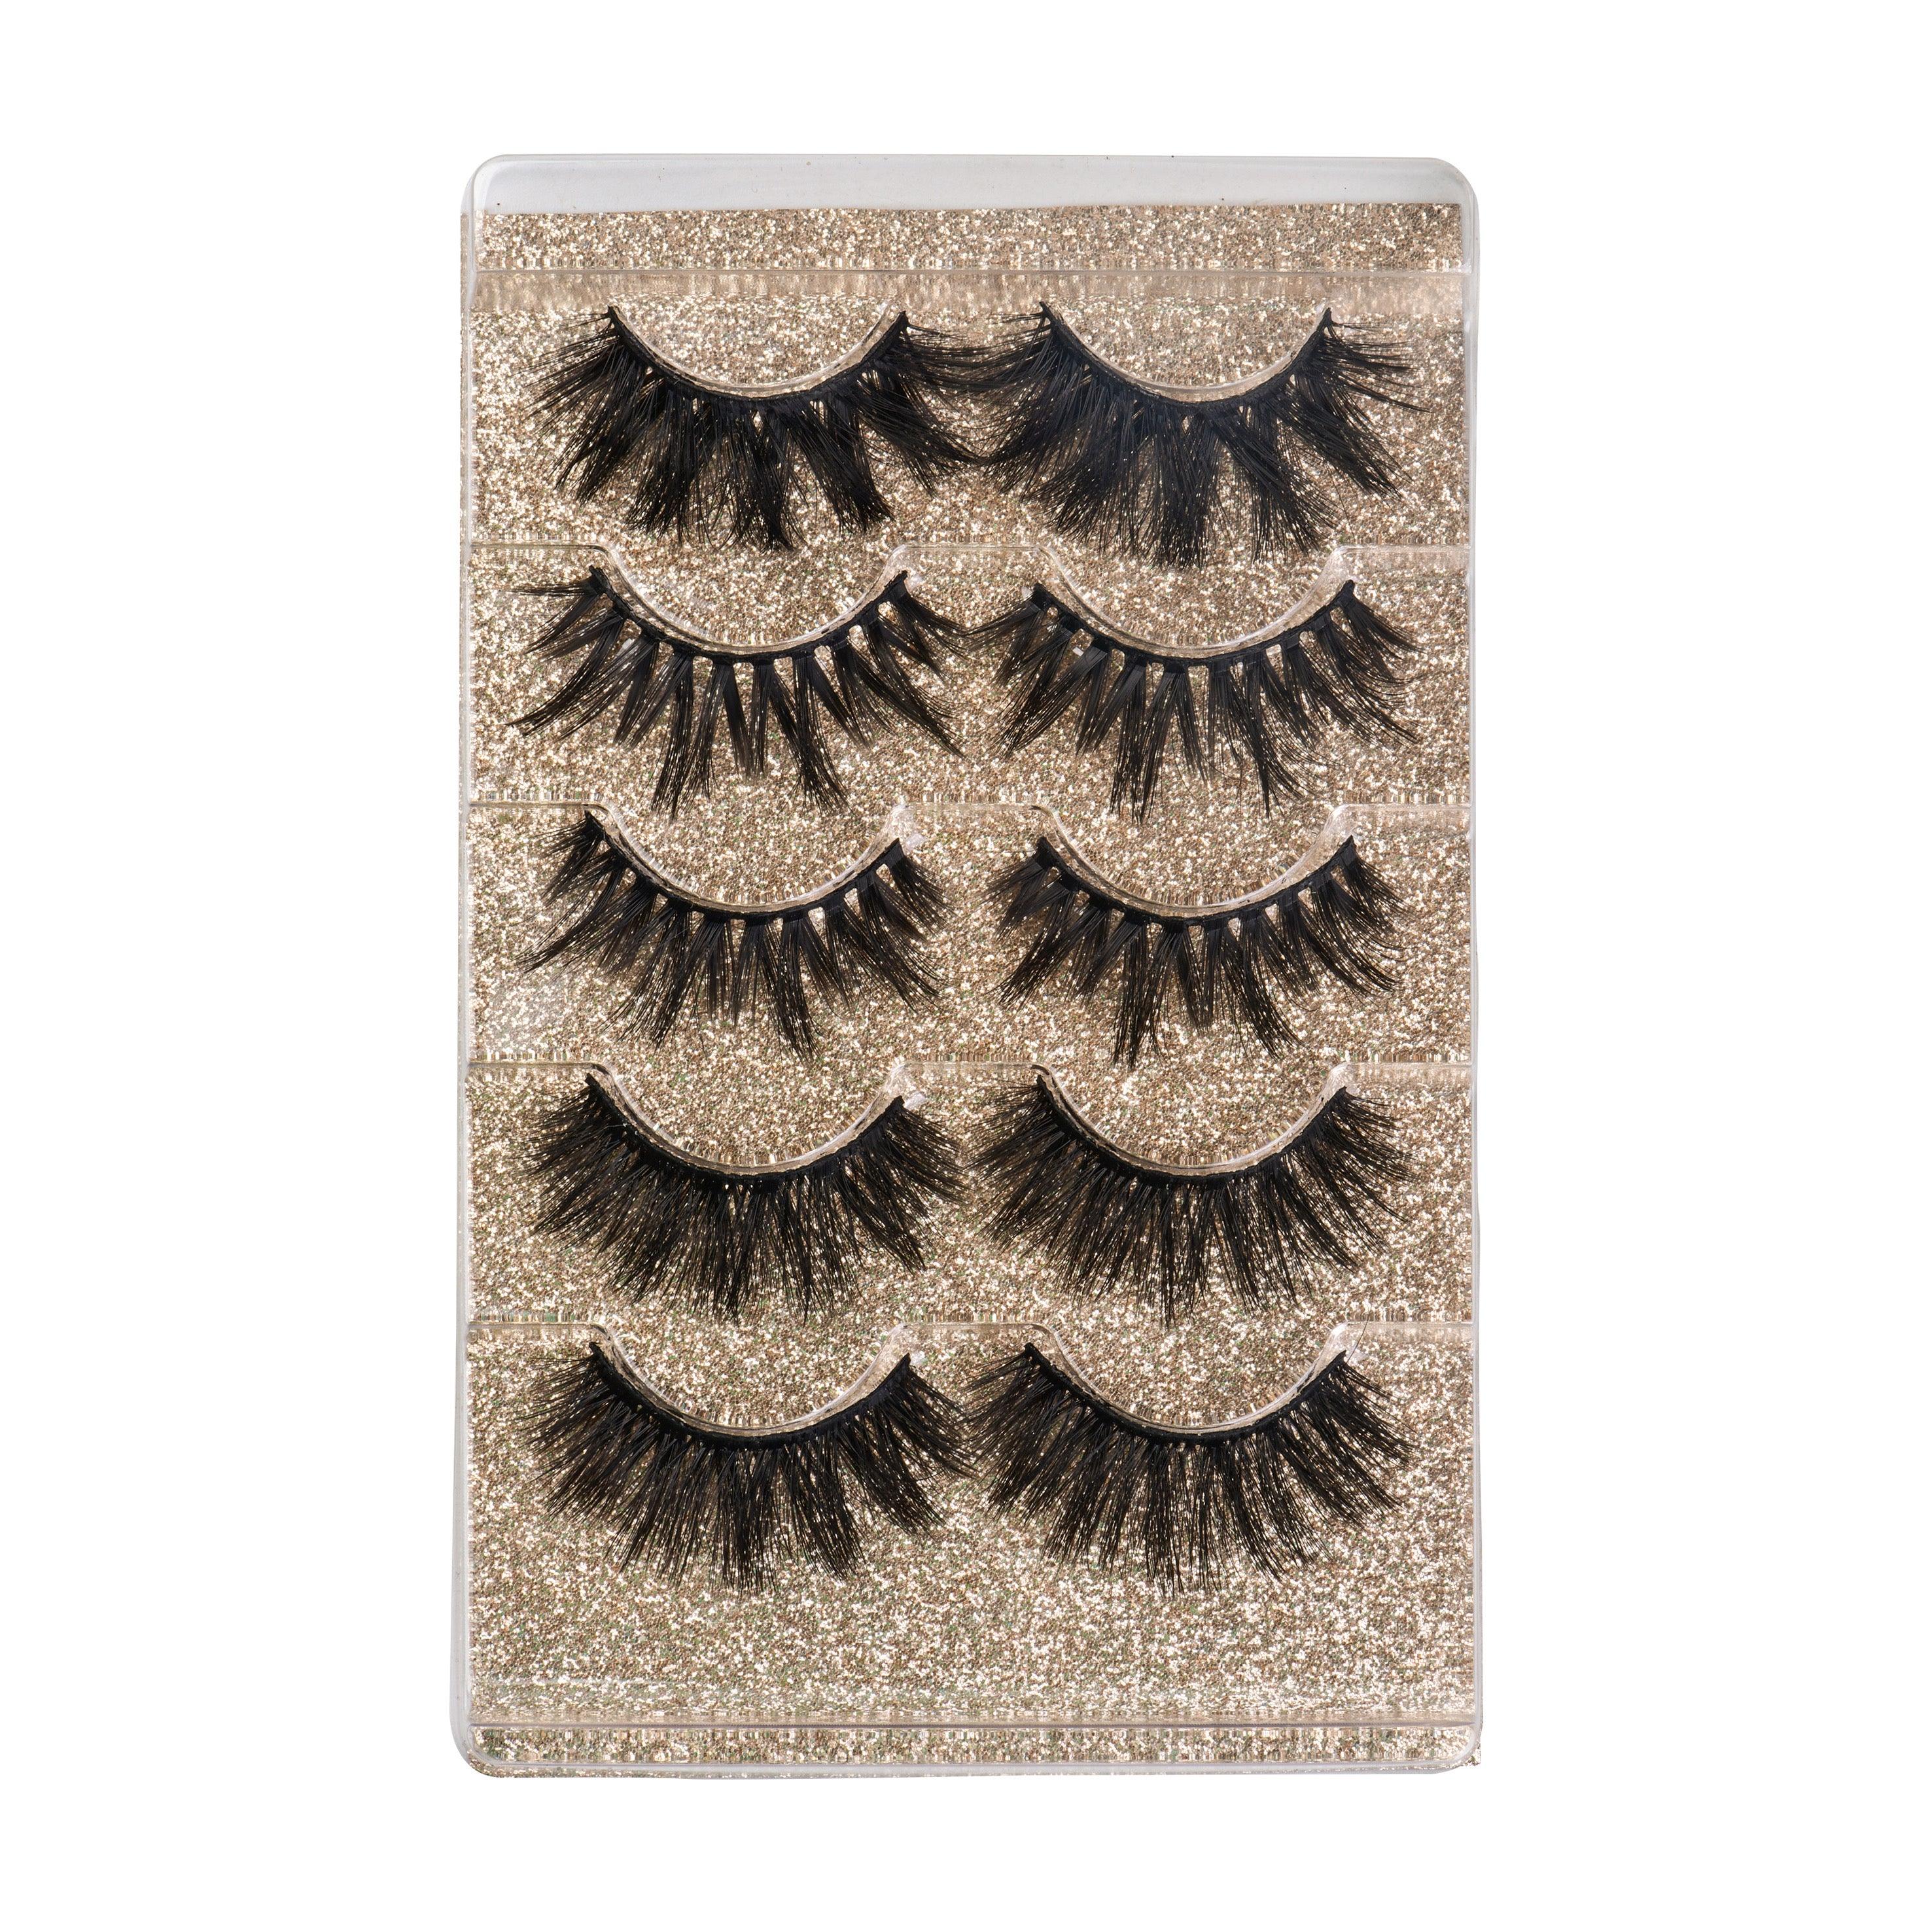 5 Pairs Majestic Lashes #2 (Pack of 6) - Miss Lil USA Wholesale